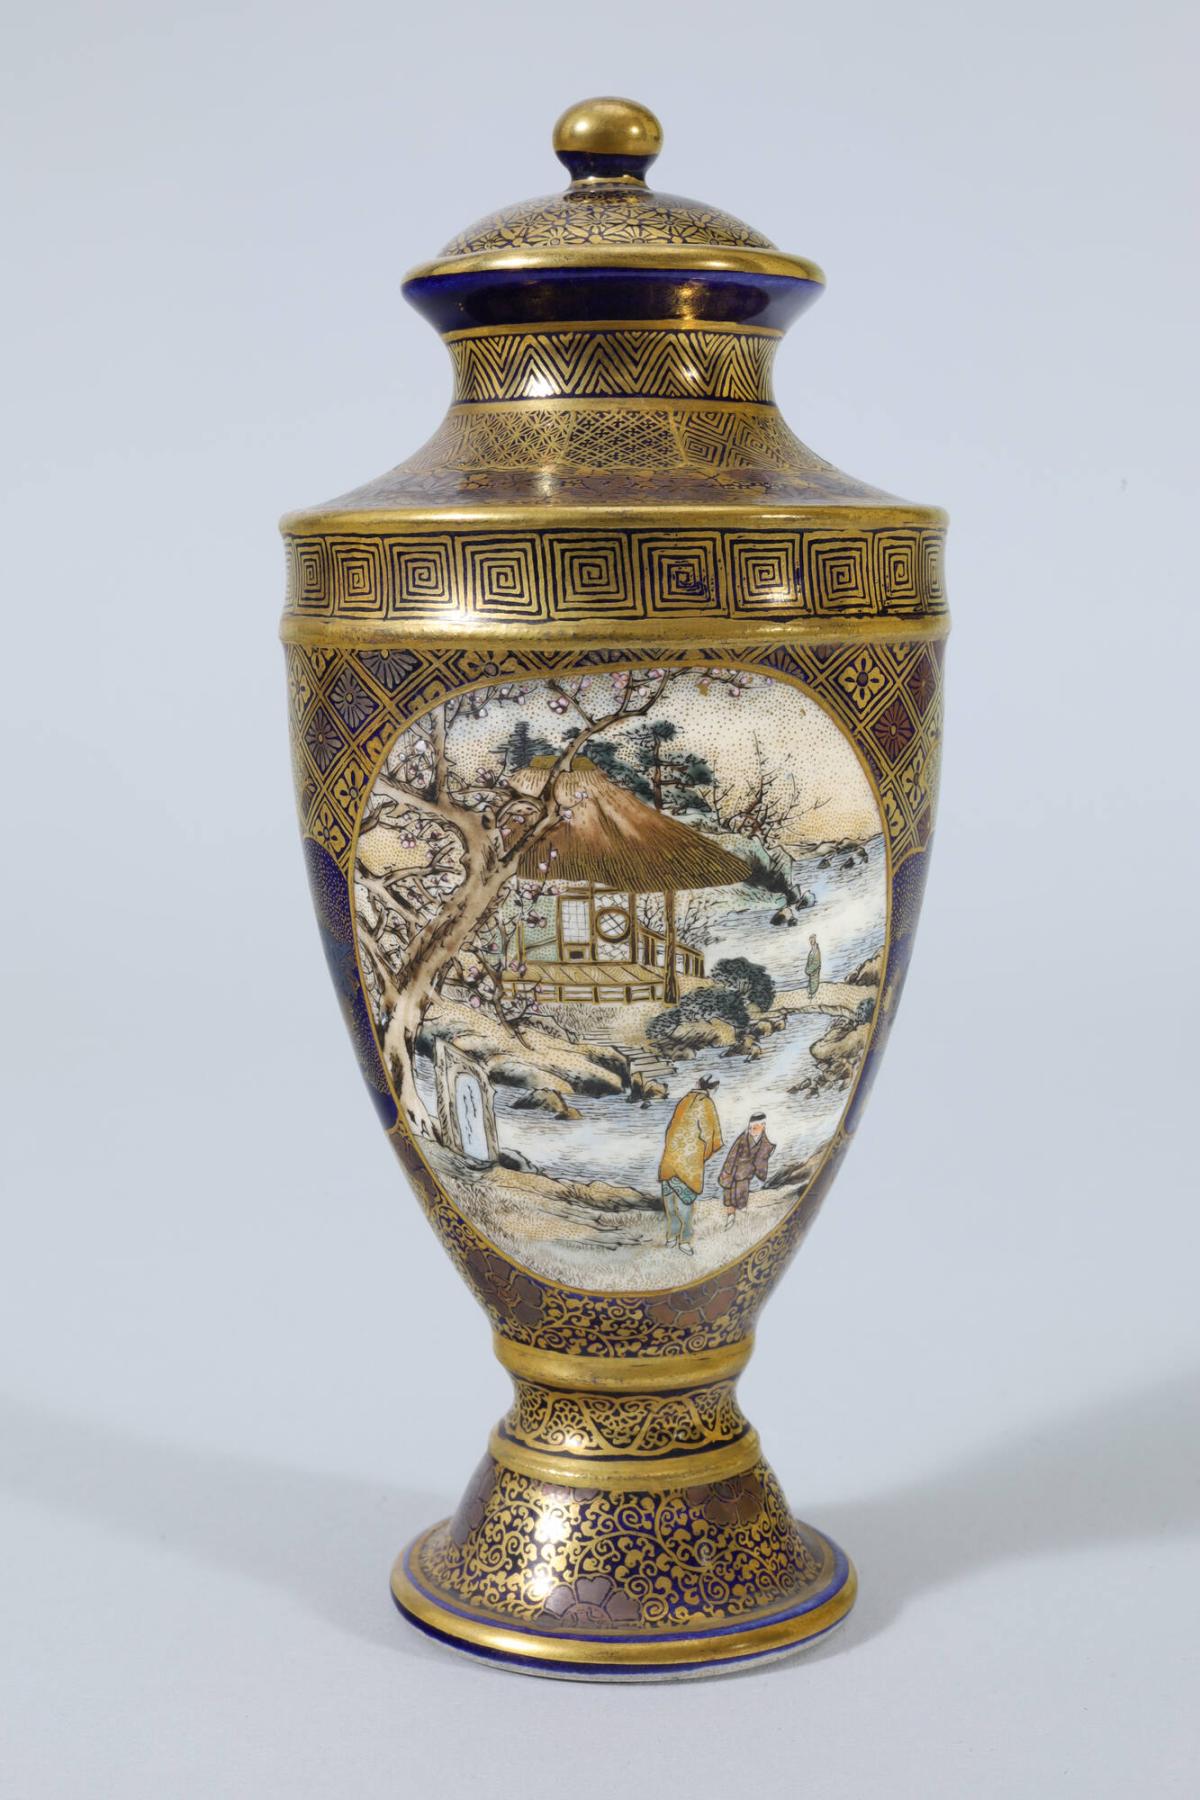 Covered Vase with Figural Medallions and Floral Designs